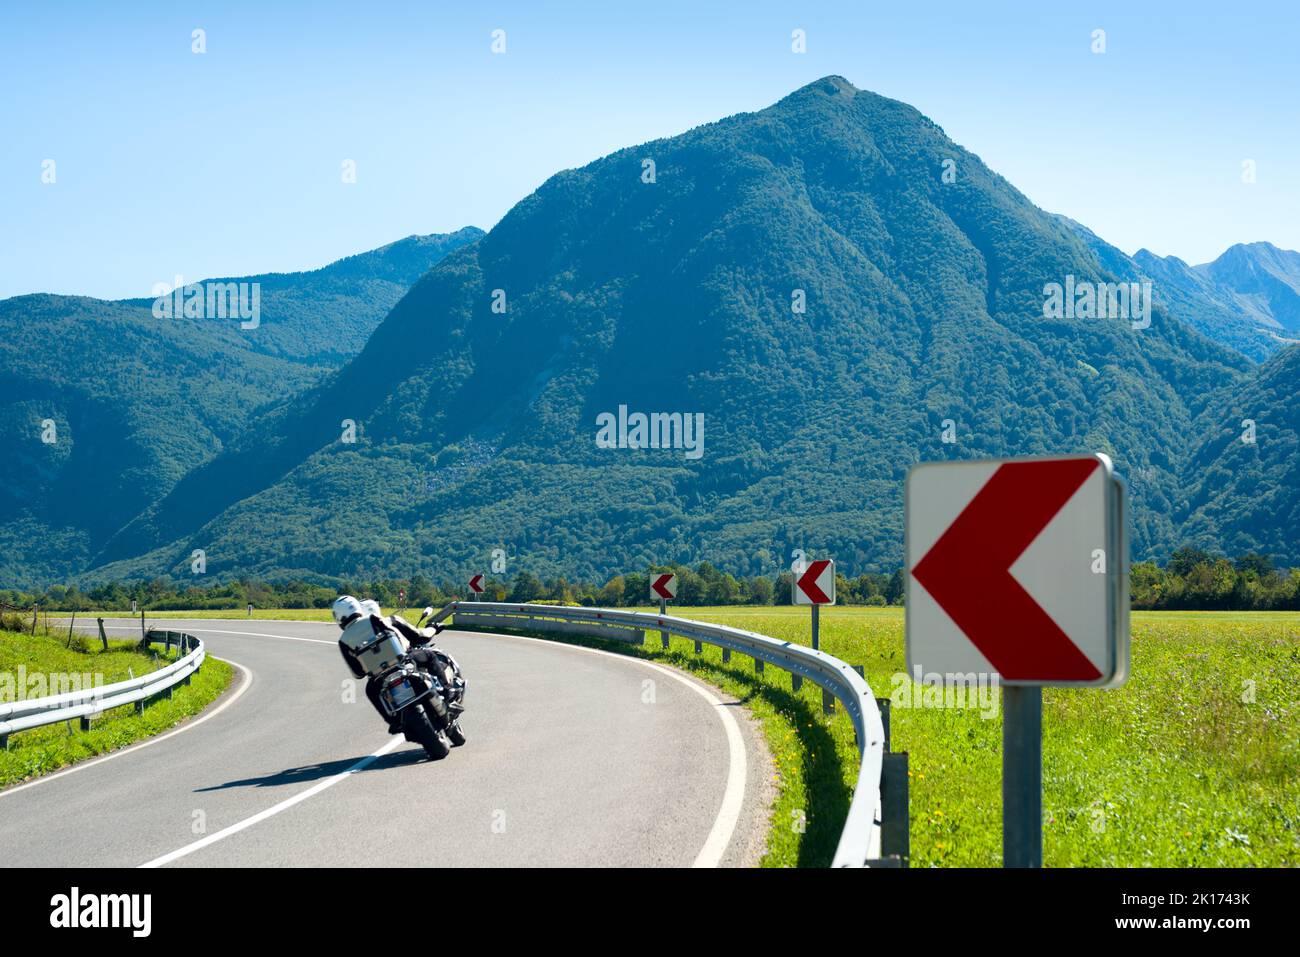 Motorbike passing a turn on alpine highway against blue mountain Stock Photo